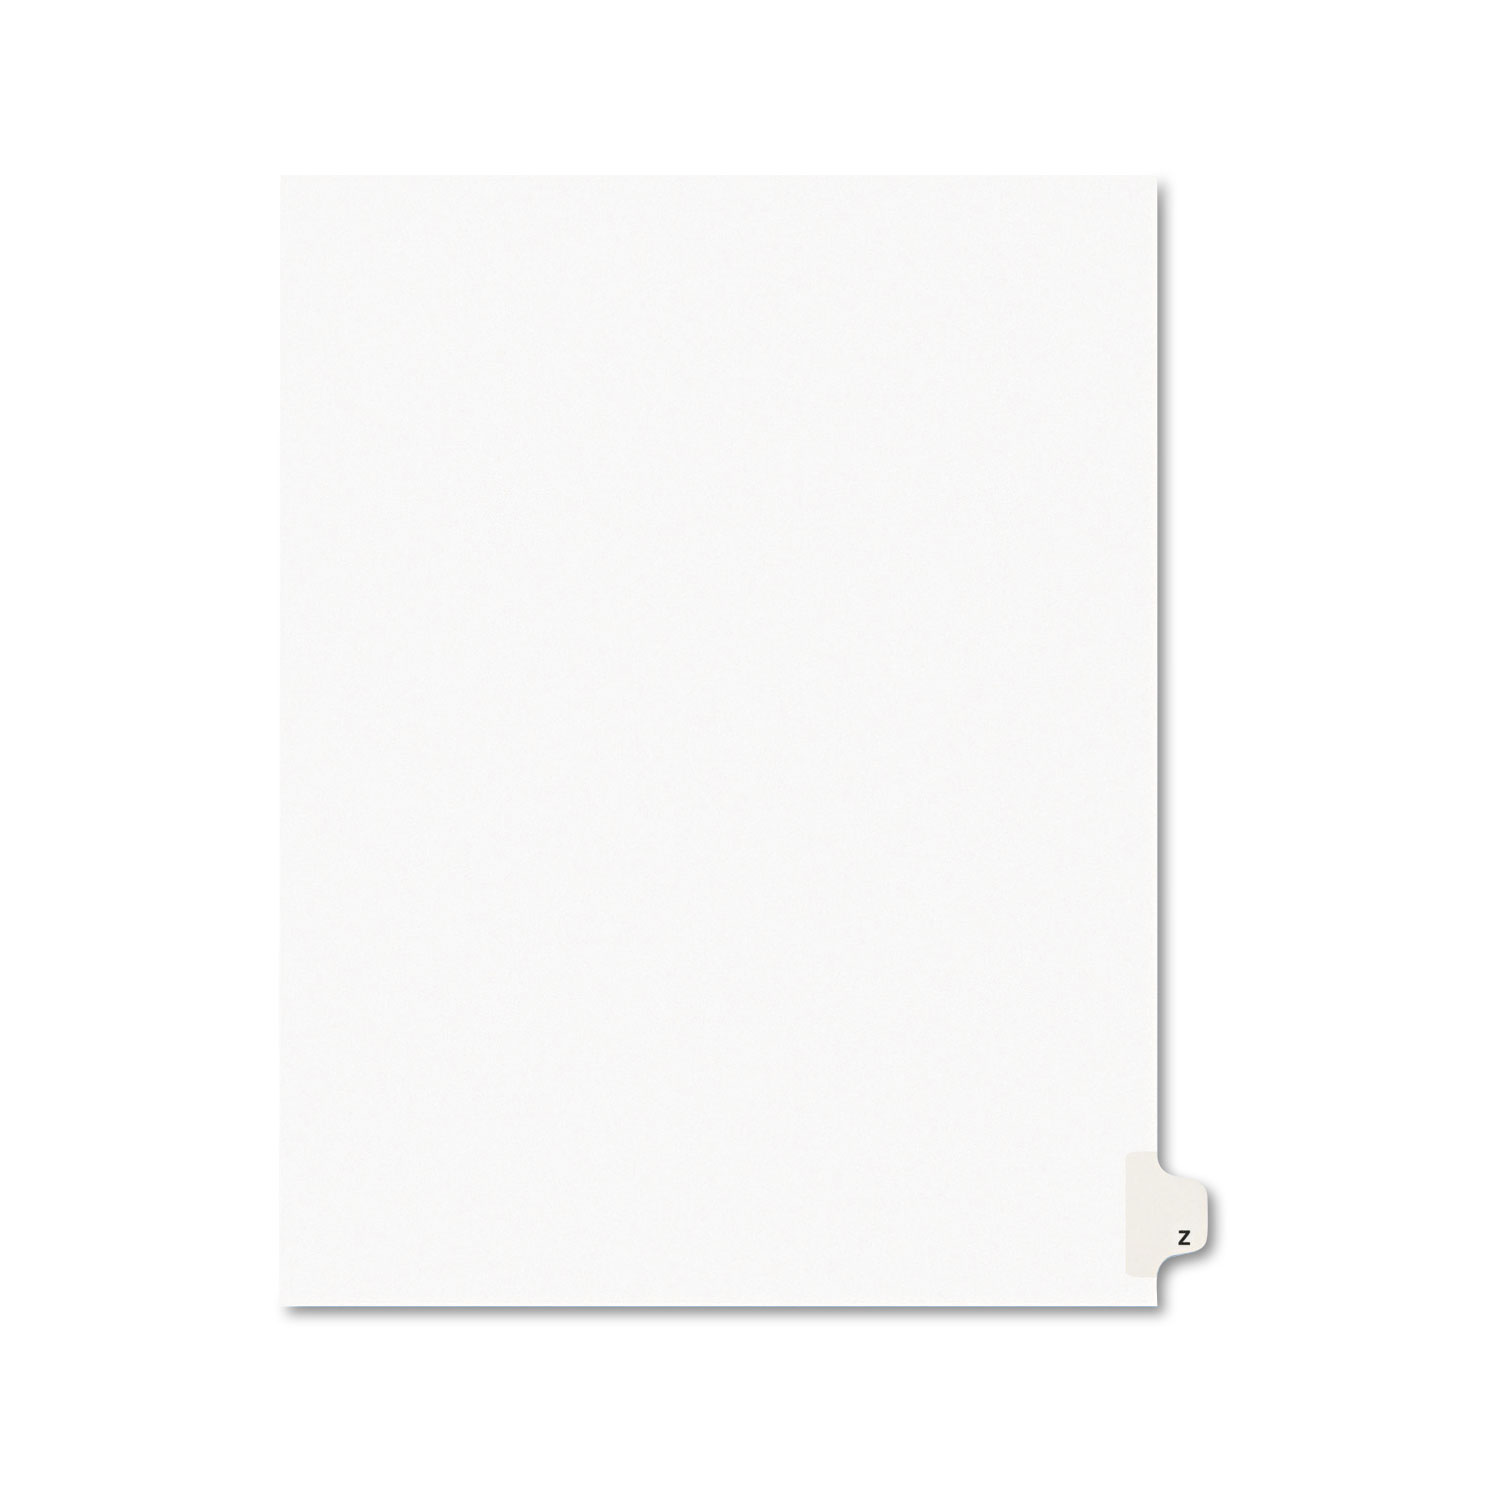  Avery 01426 Preprinted Legal Exhibit Side Tab Index Dividers, Avery Style, 26-Tab, Z, 11 x 8.5, White, 25/Pack (AVE01426) 